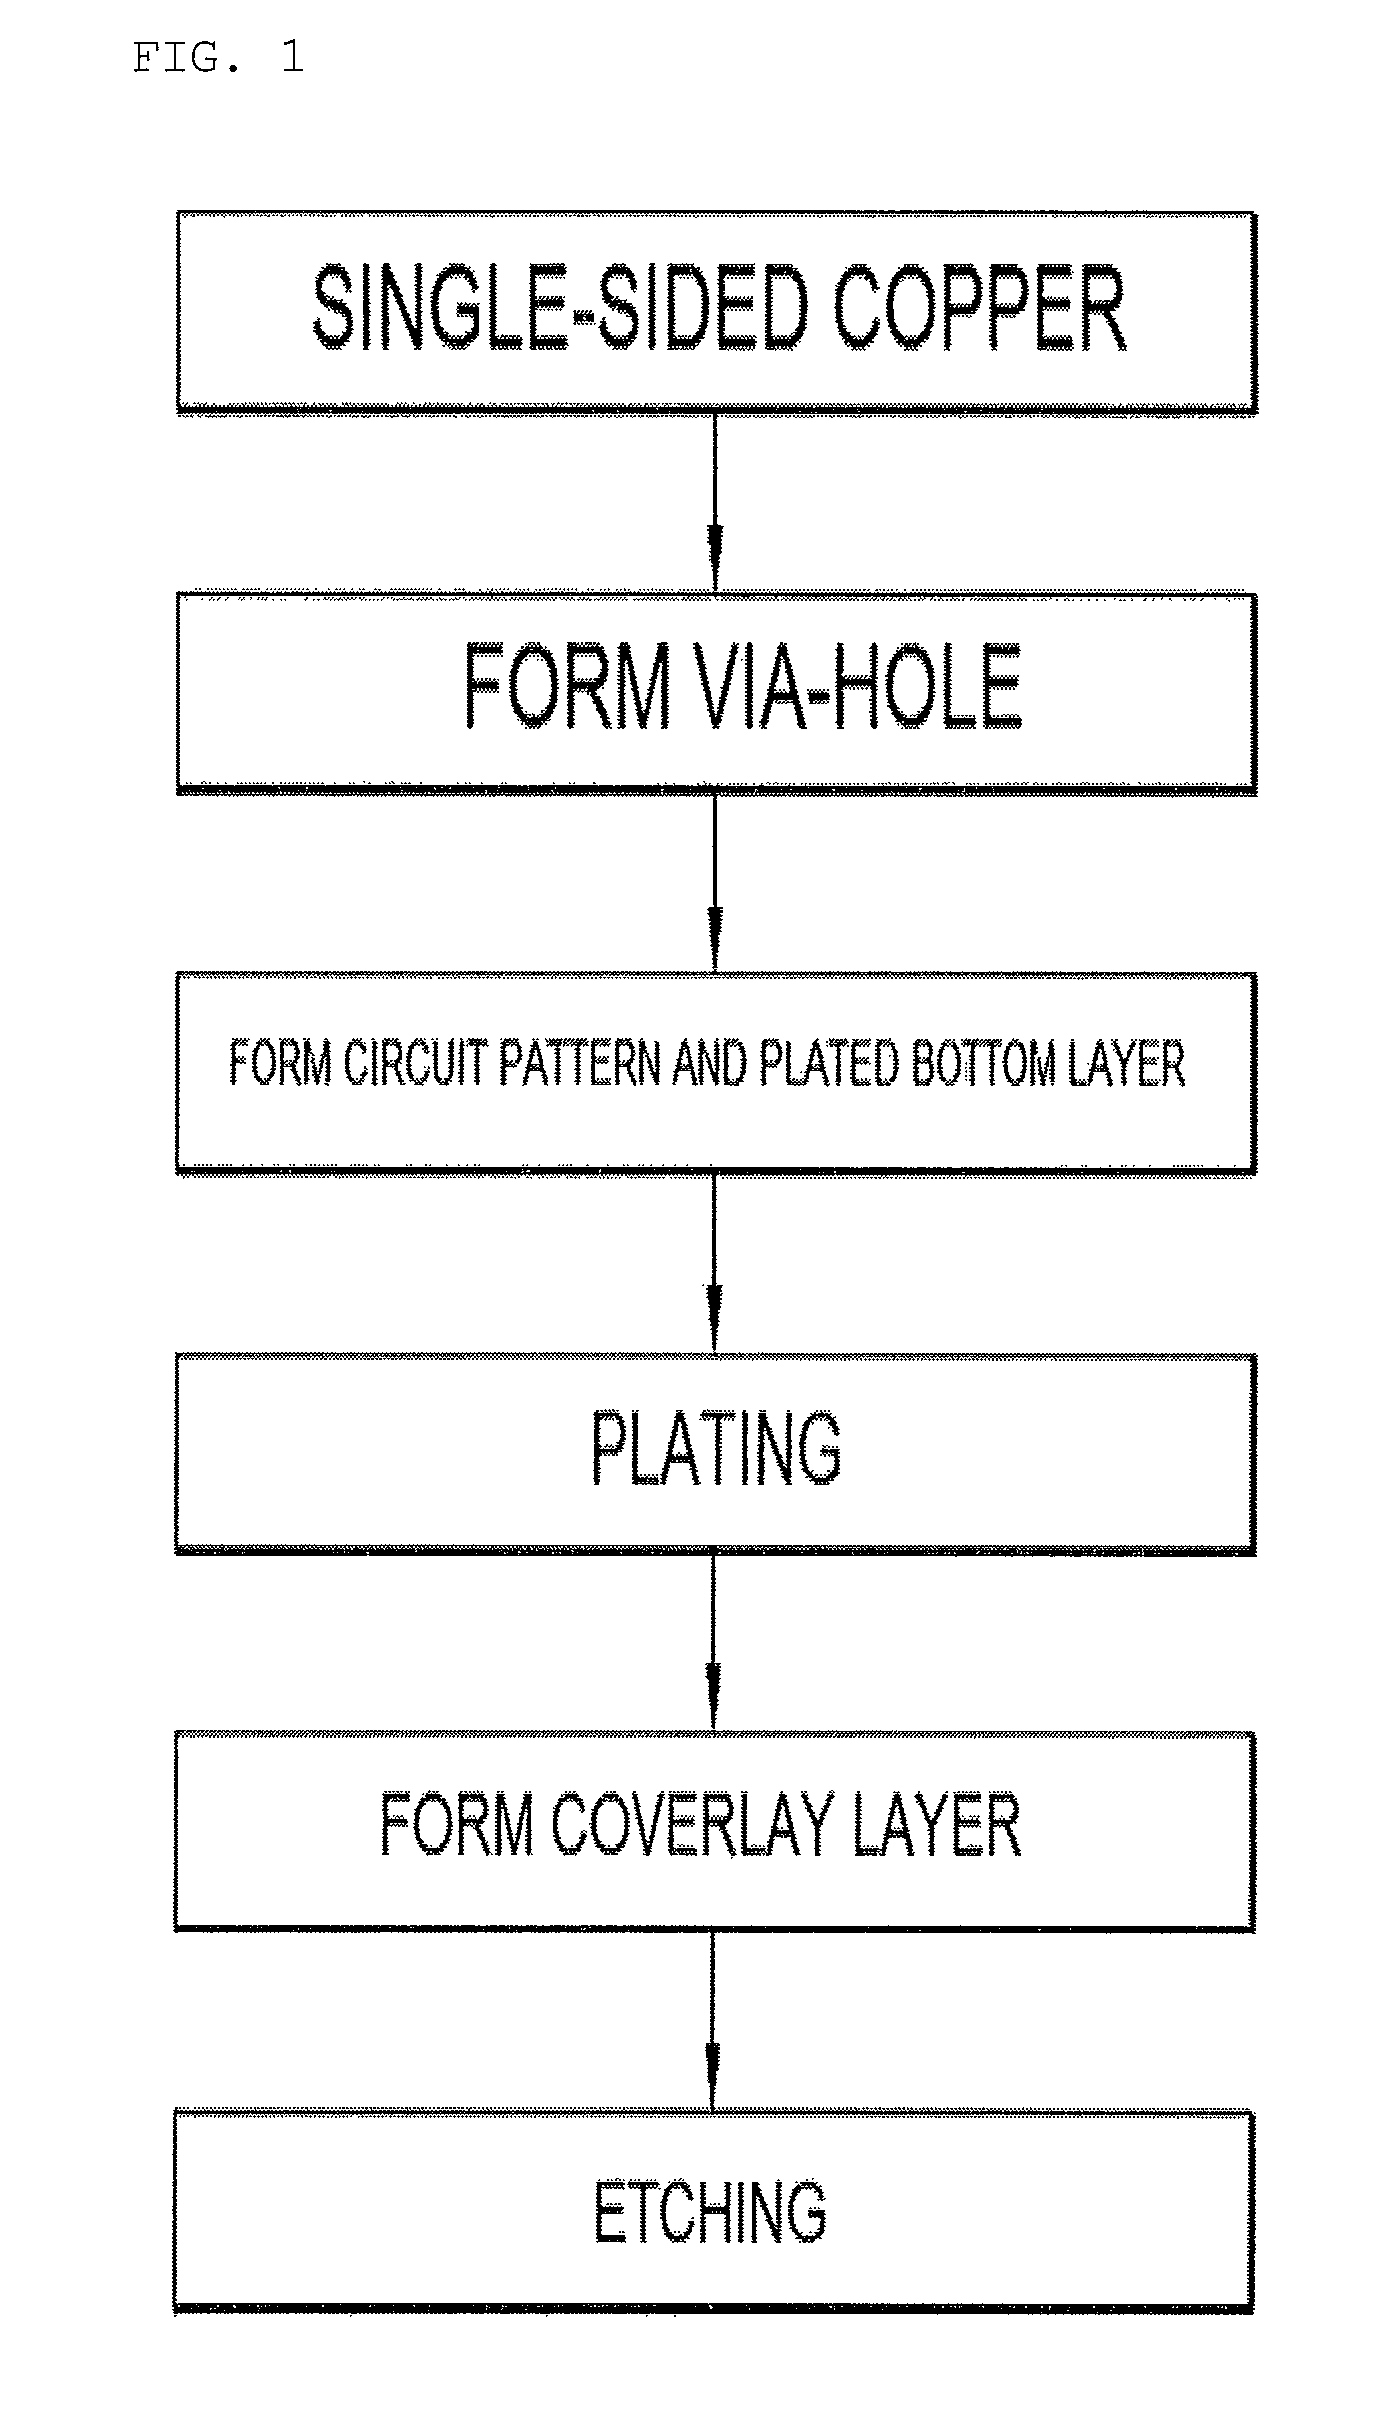 Method for manufacturing a double-sided printed circuit board